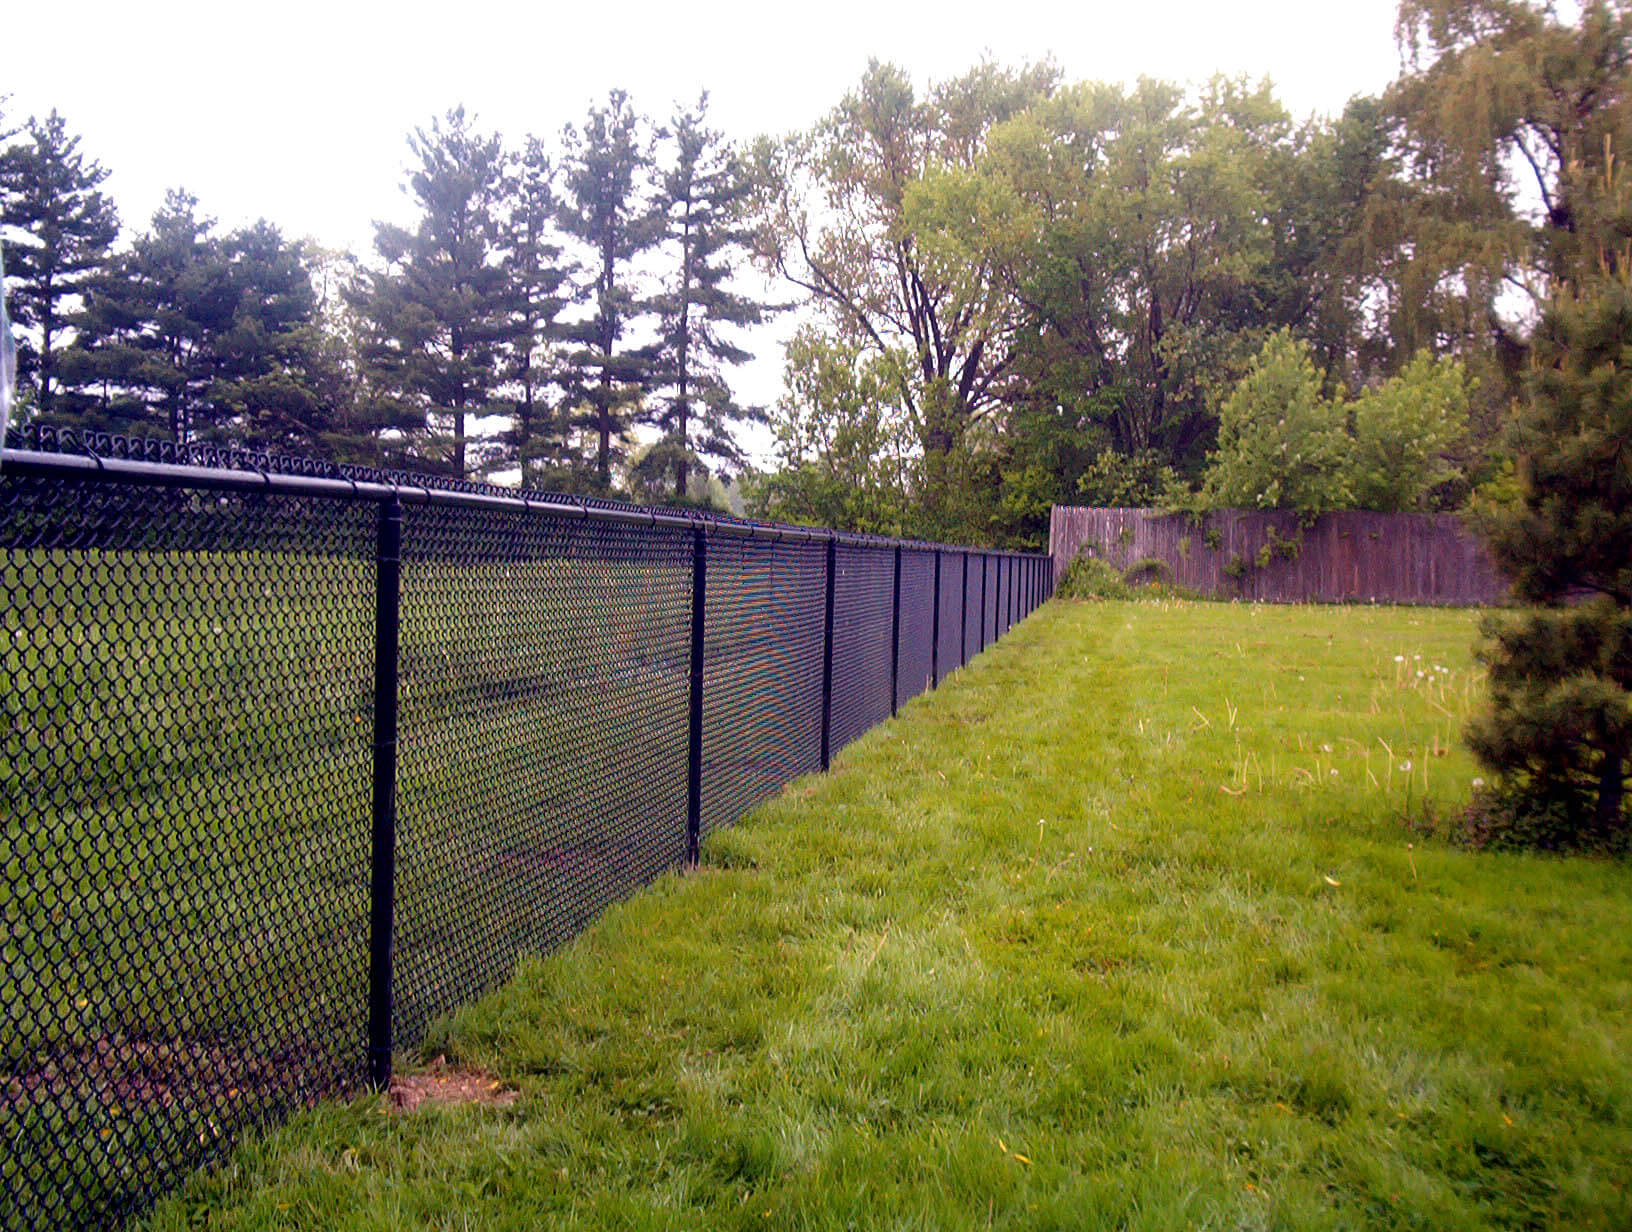 "Wire Mesh Fence: Blending Security and Aesthetics"